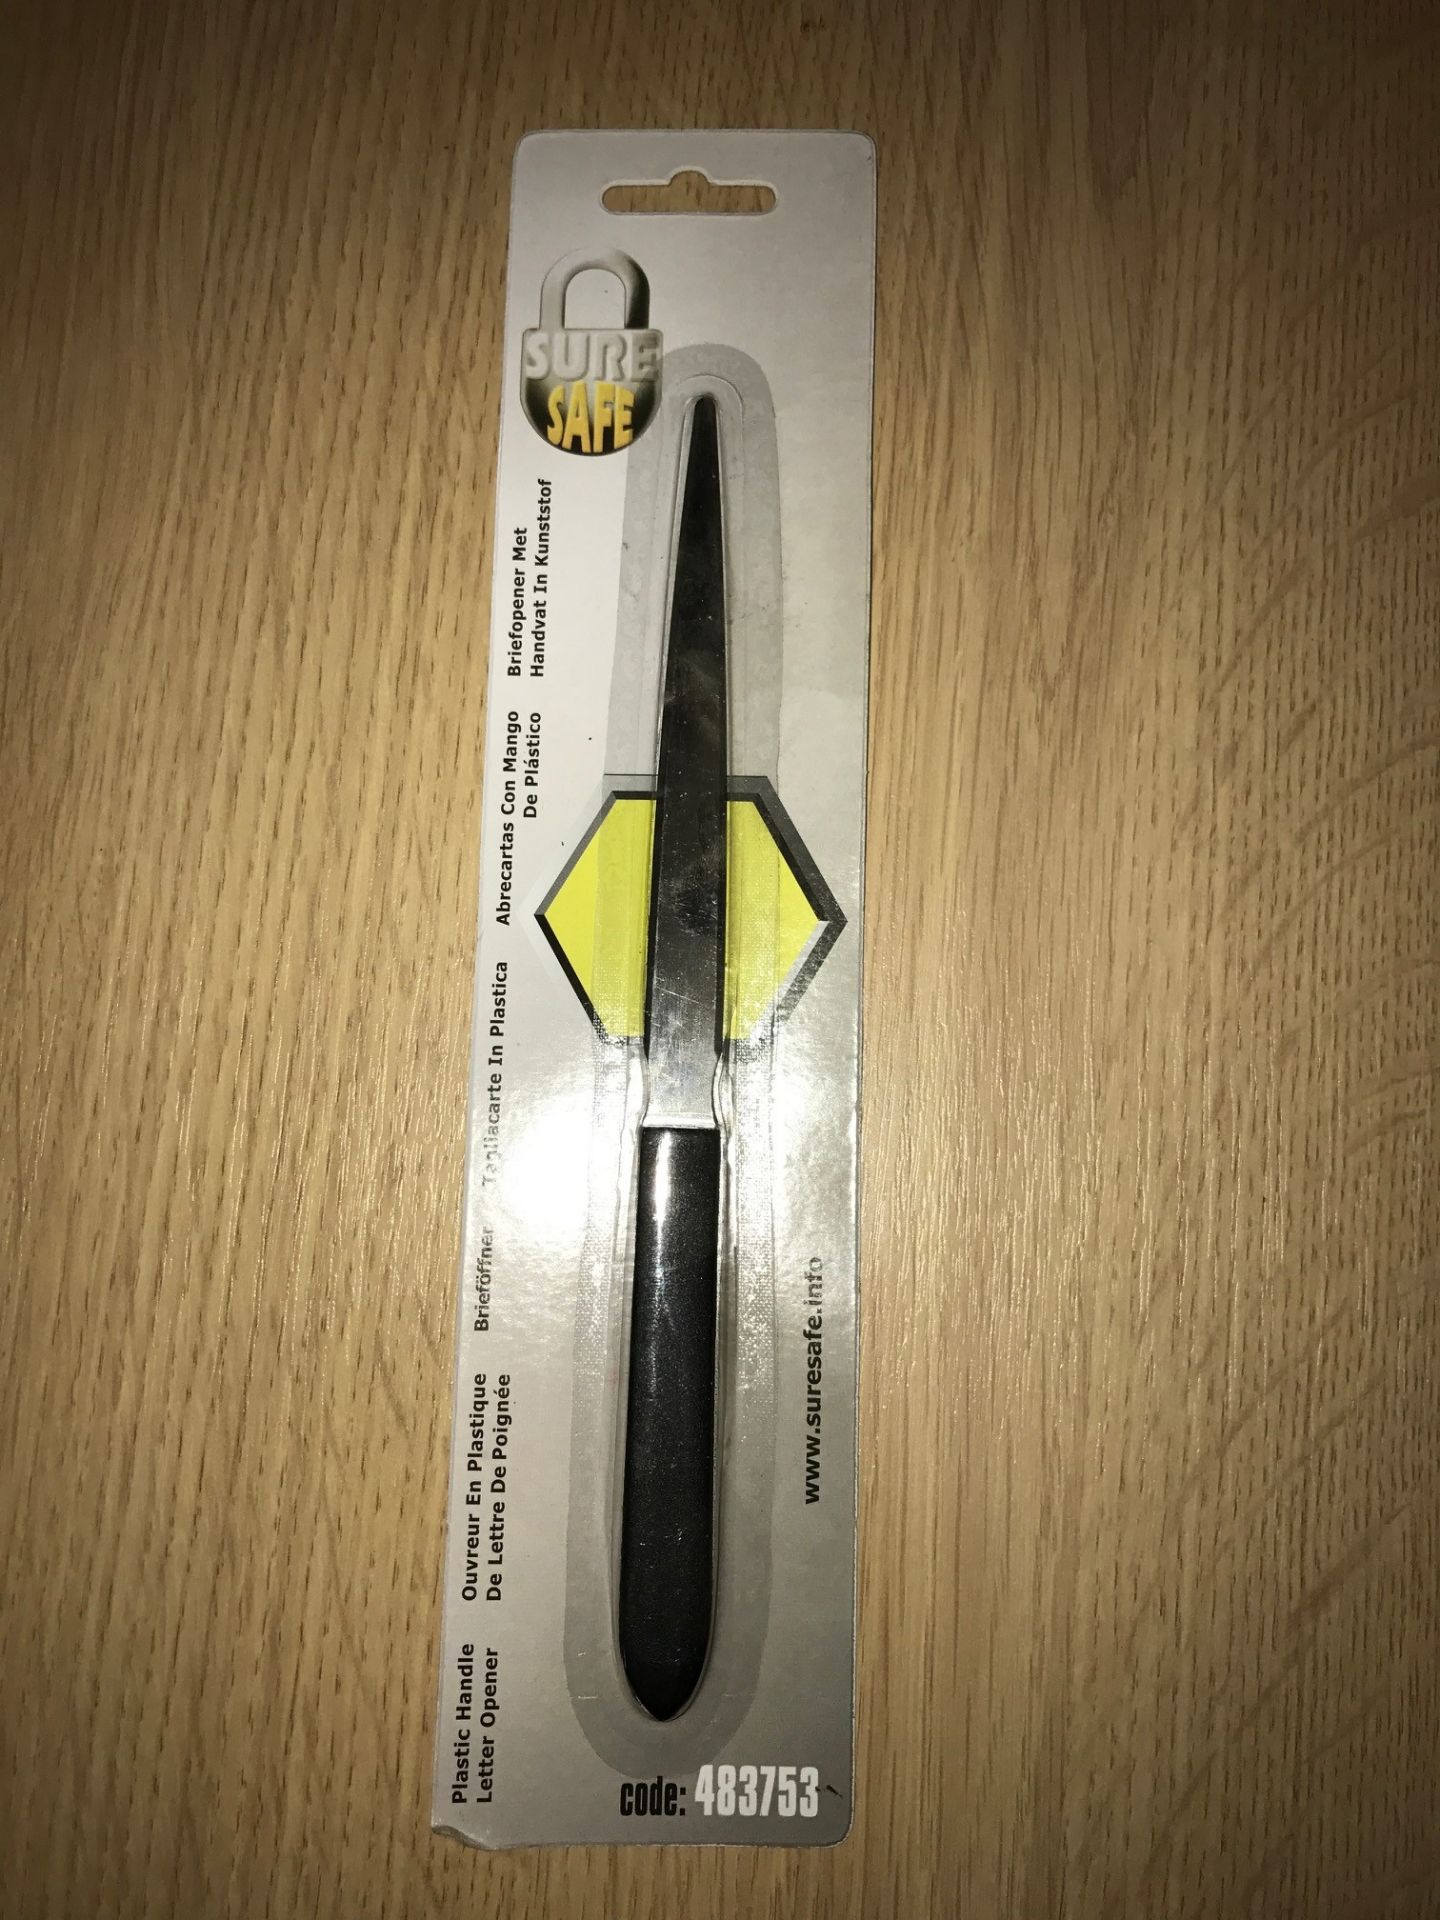 48 x Suresafe L005 Letter Openers - RRP £4.99 Each (Brand New & Sealed)